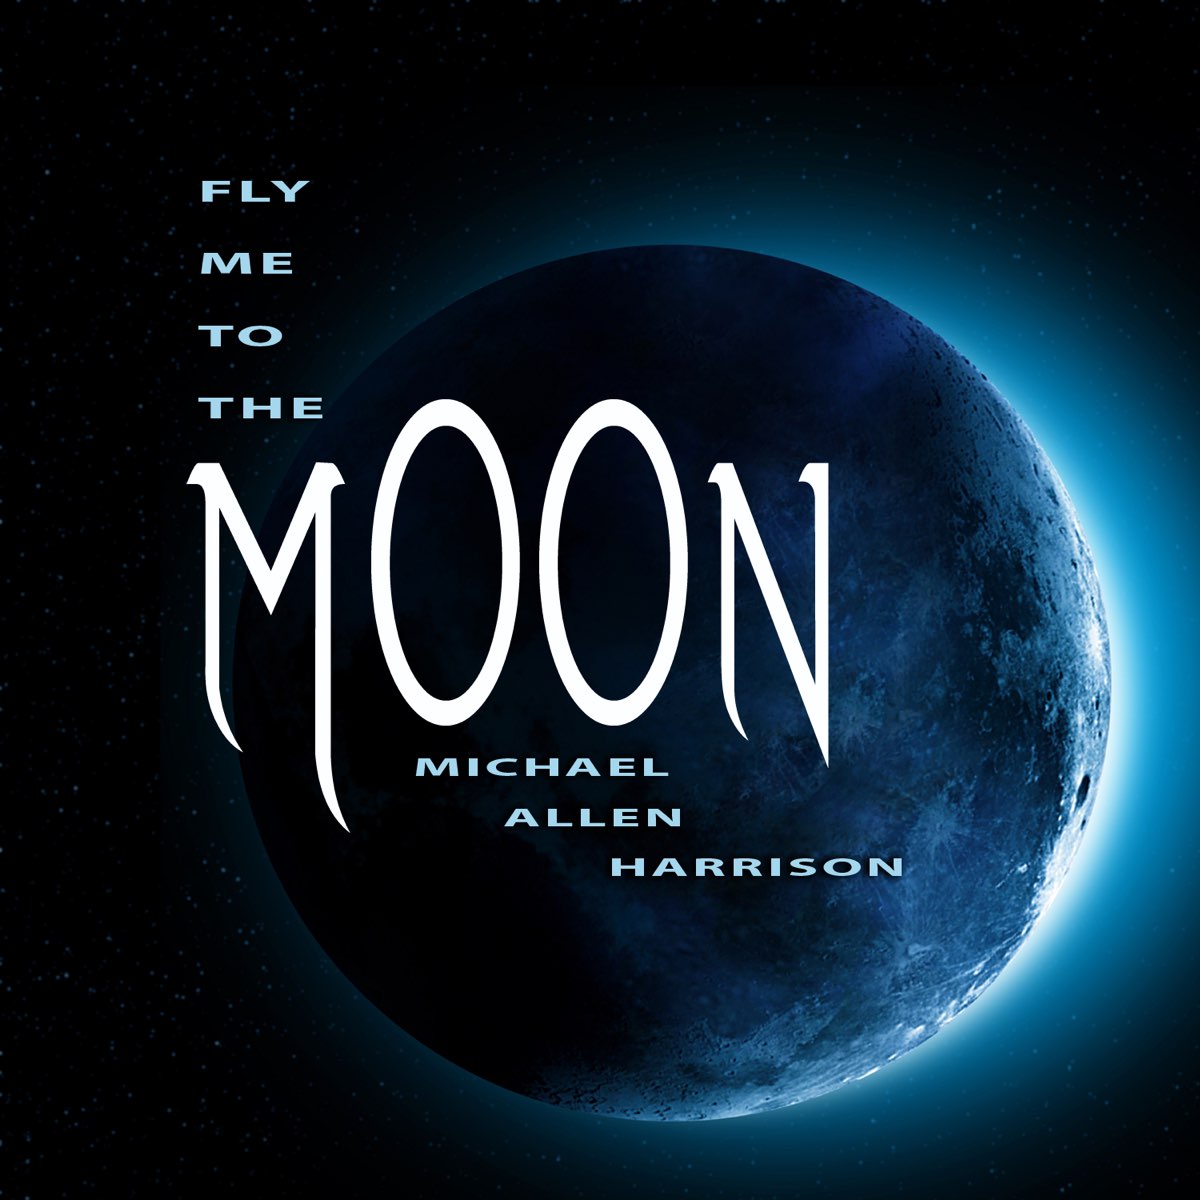 Fly the moon слушать. Fly me 2 the Moon игра. Обложка музыка Moon. Classic Music Луна. Space Odyssey 2001 poster.